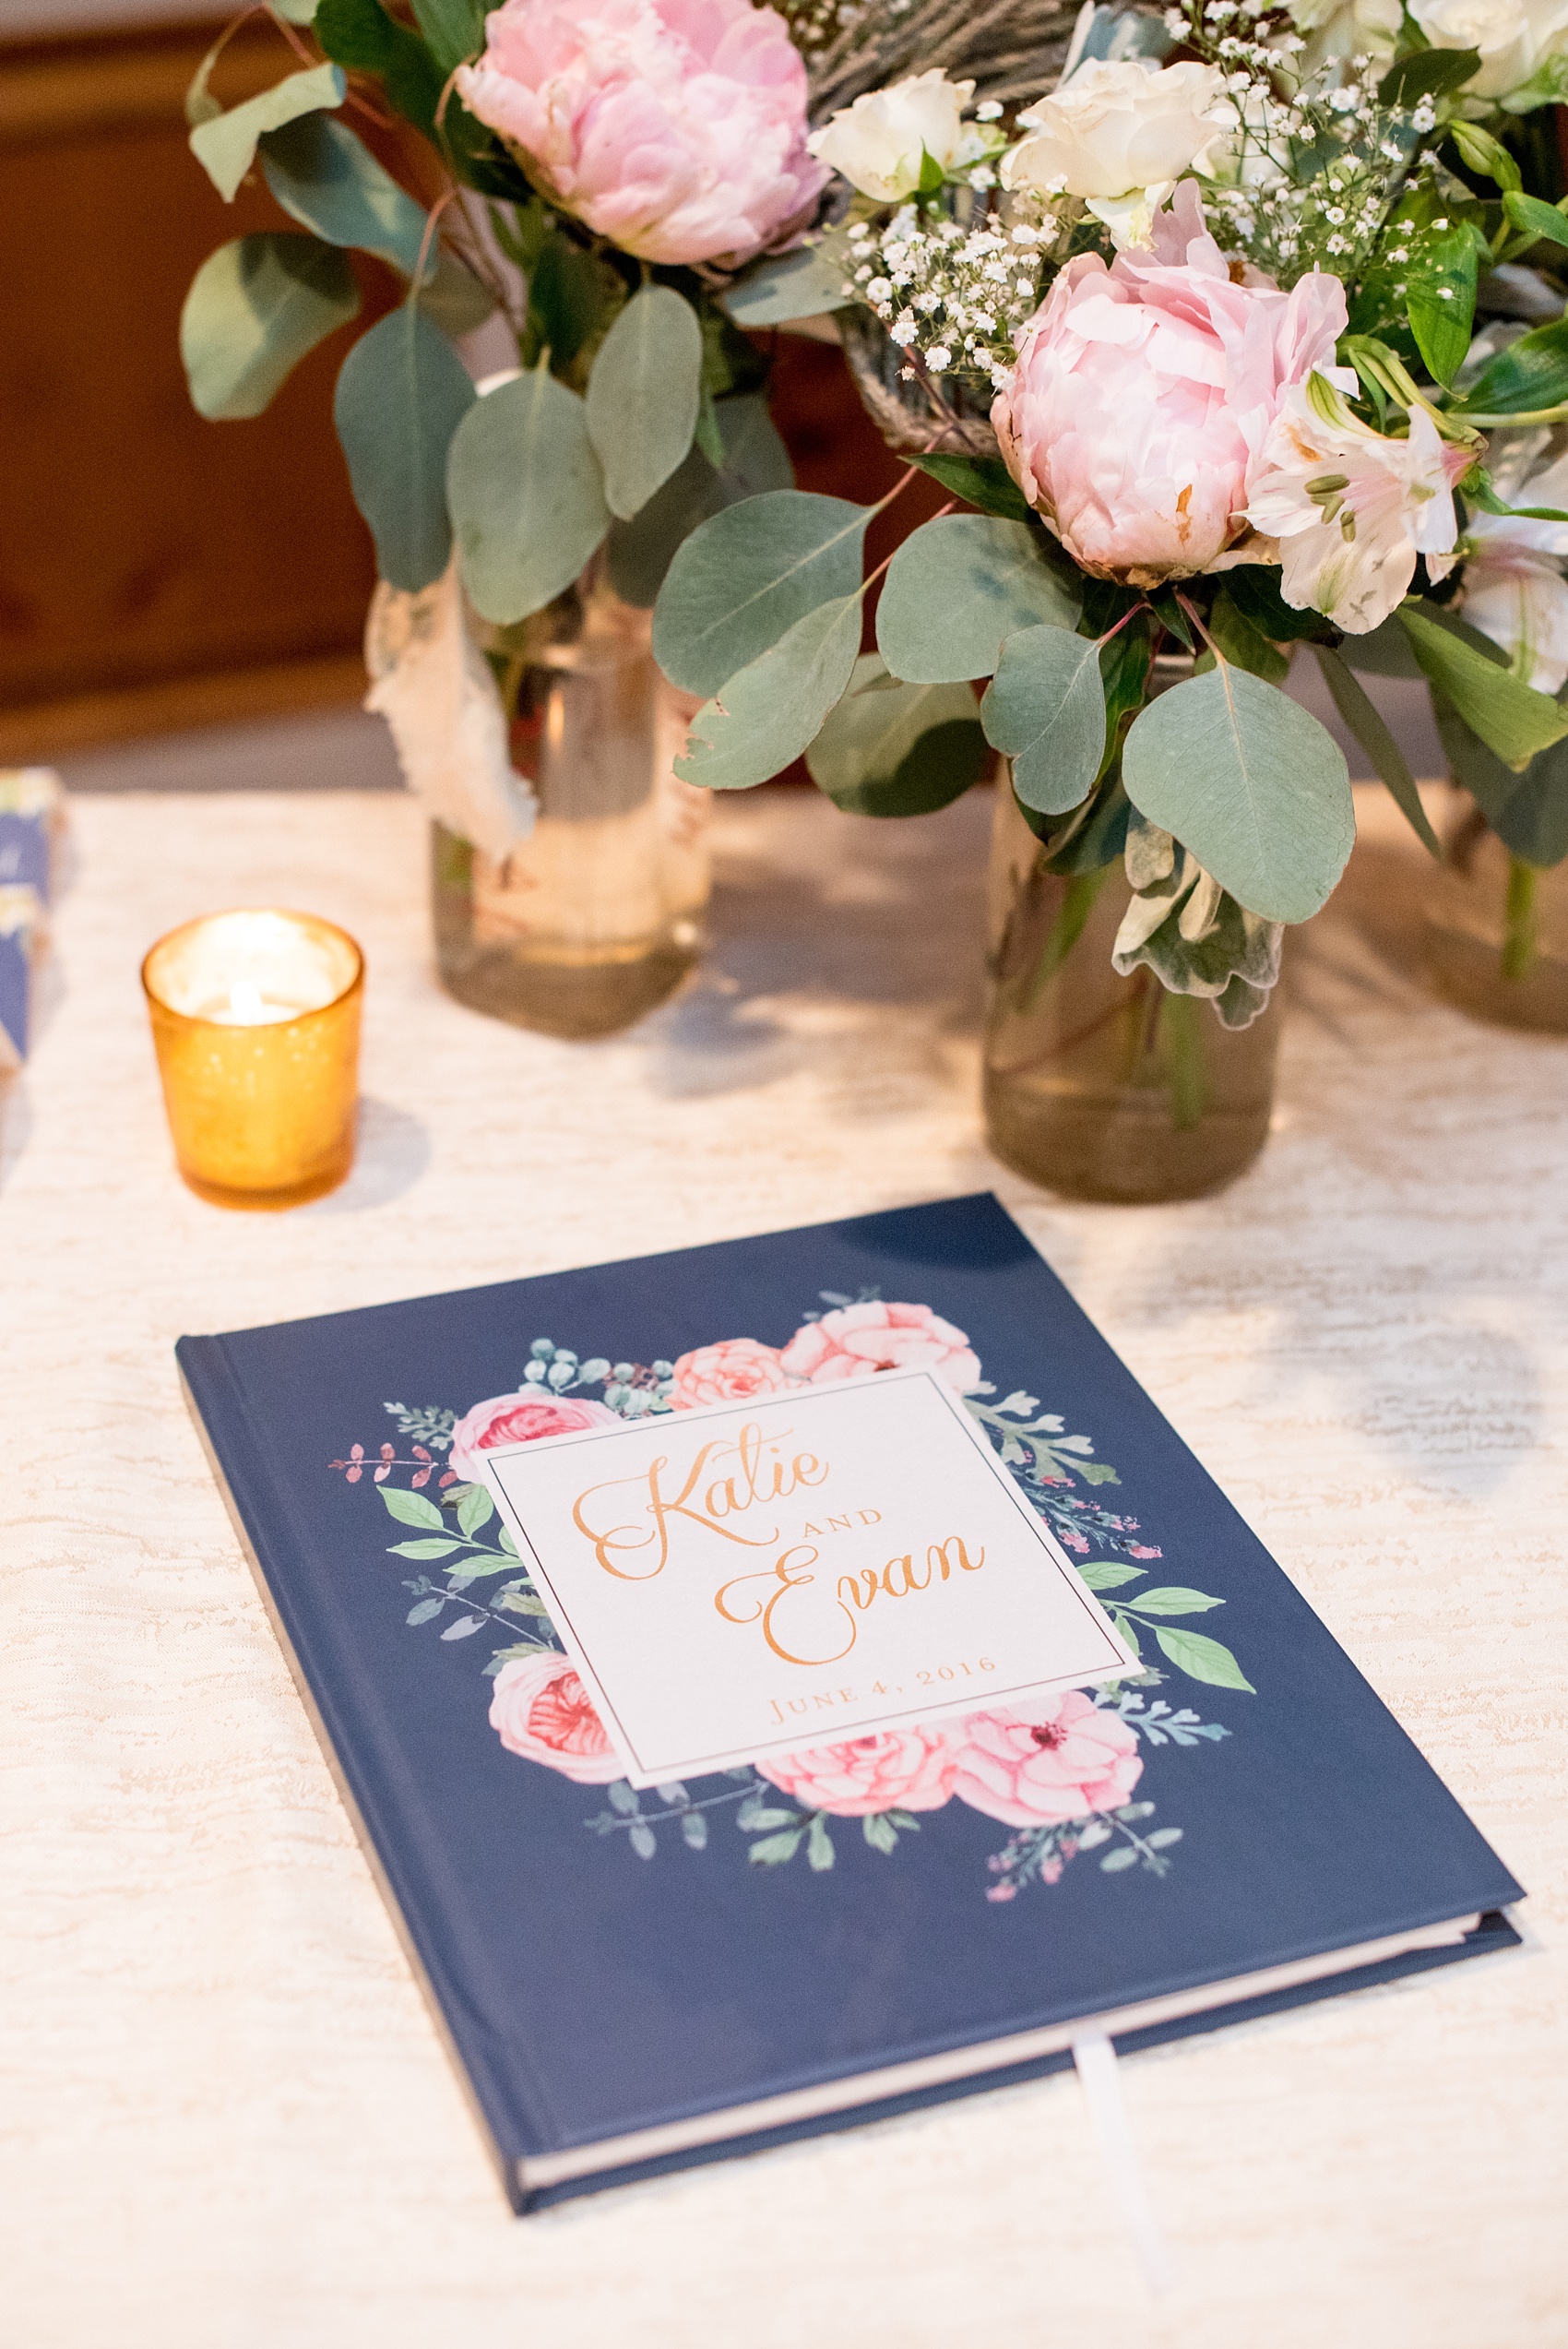 Mikkel Paige Photography photo of a wedding at the Madison Hotel in NJ. Image of the navy floral guest book.